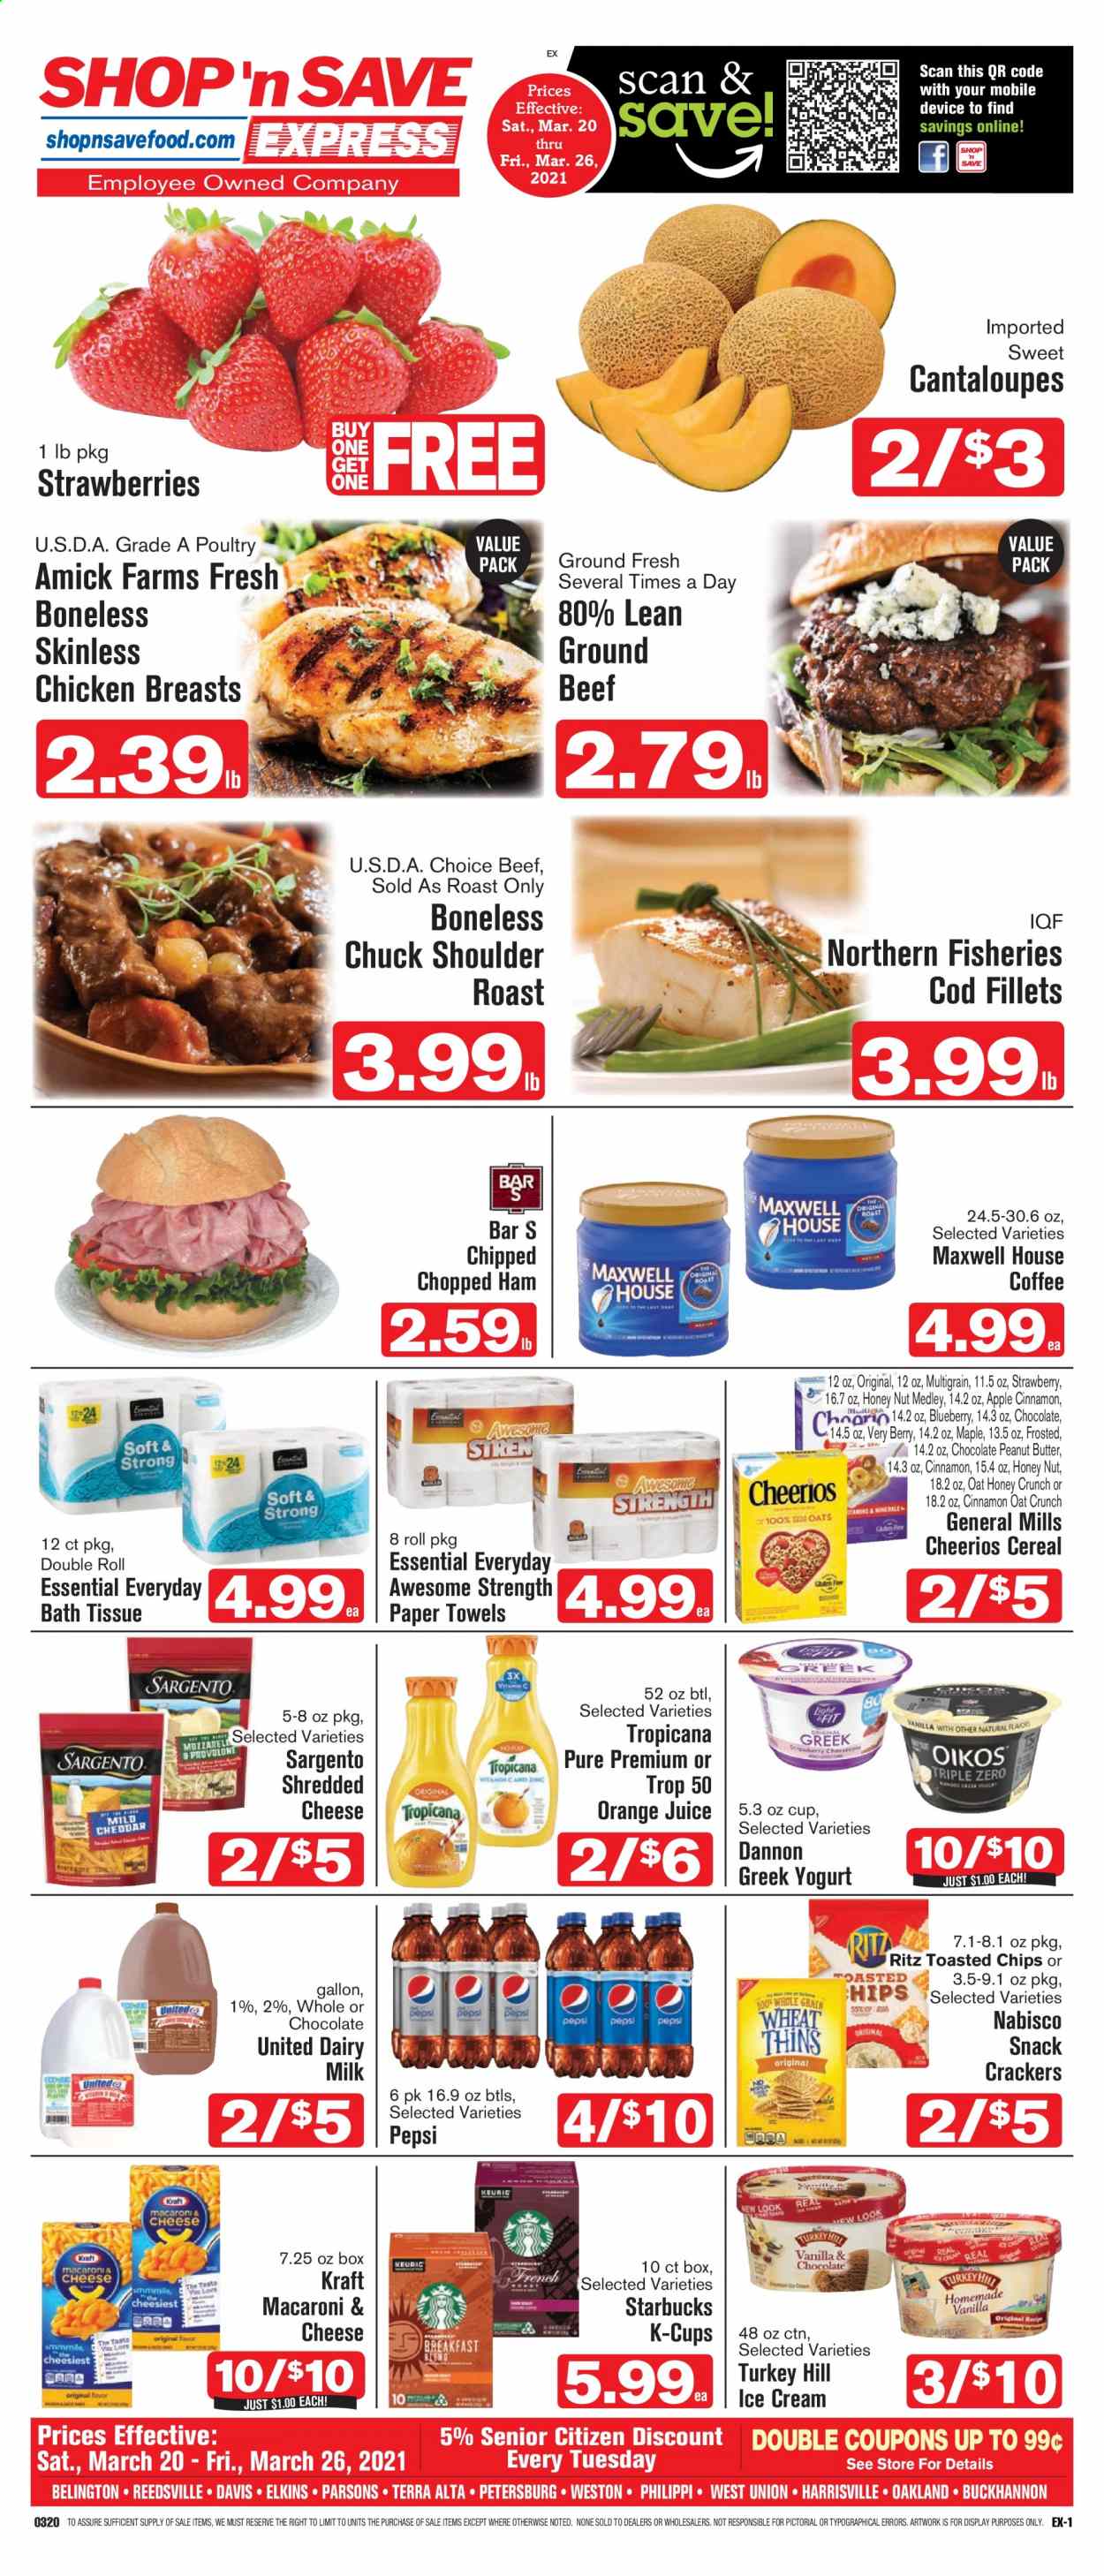 thumbnail - Shop ‘n Save Express Flyer - 03/20/2021 - 03/26/2021 - Sales products - cantaloupe, chicken breasts, beef meat, ground beef, cod, macaroni & cheese, Kraft®, ham, shredded cheese, Sargento, greek yoghurt, yoghurt, Dannon, ice cream, strawberries, chocolate, crackers, Dairy Milk, RITZ, chips, snack, oats, cereals, Cheerios, cinnamon, peanut butter, Pepsi, orange juice, juice, Maxwell House, coffee, Starbucks, coffee capsules, K-Cups, bath tissue, kitchen towels, paper towels. Page 1.